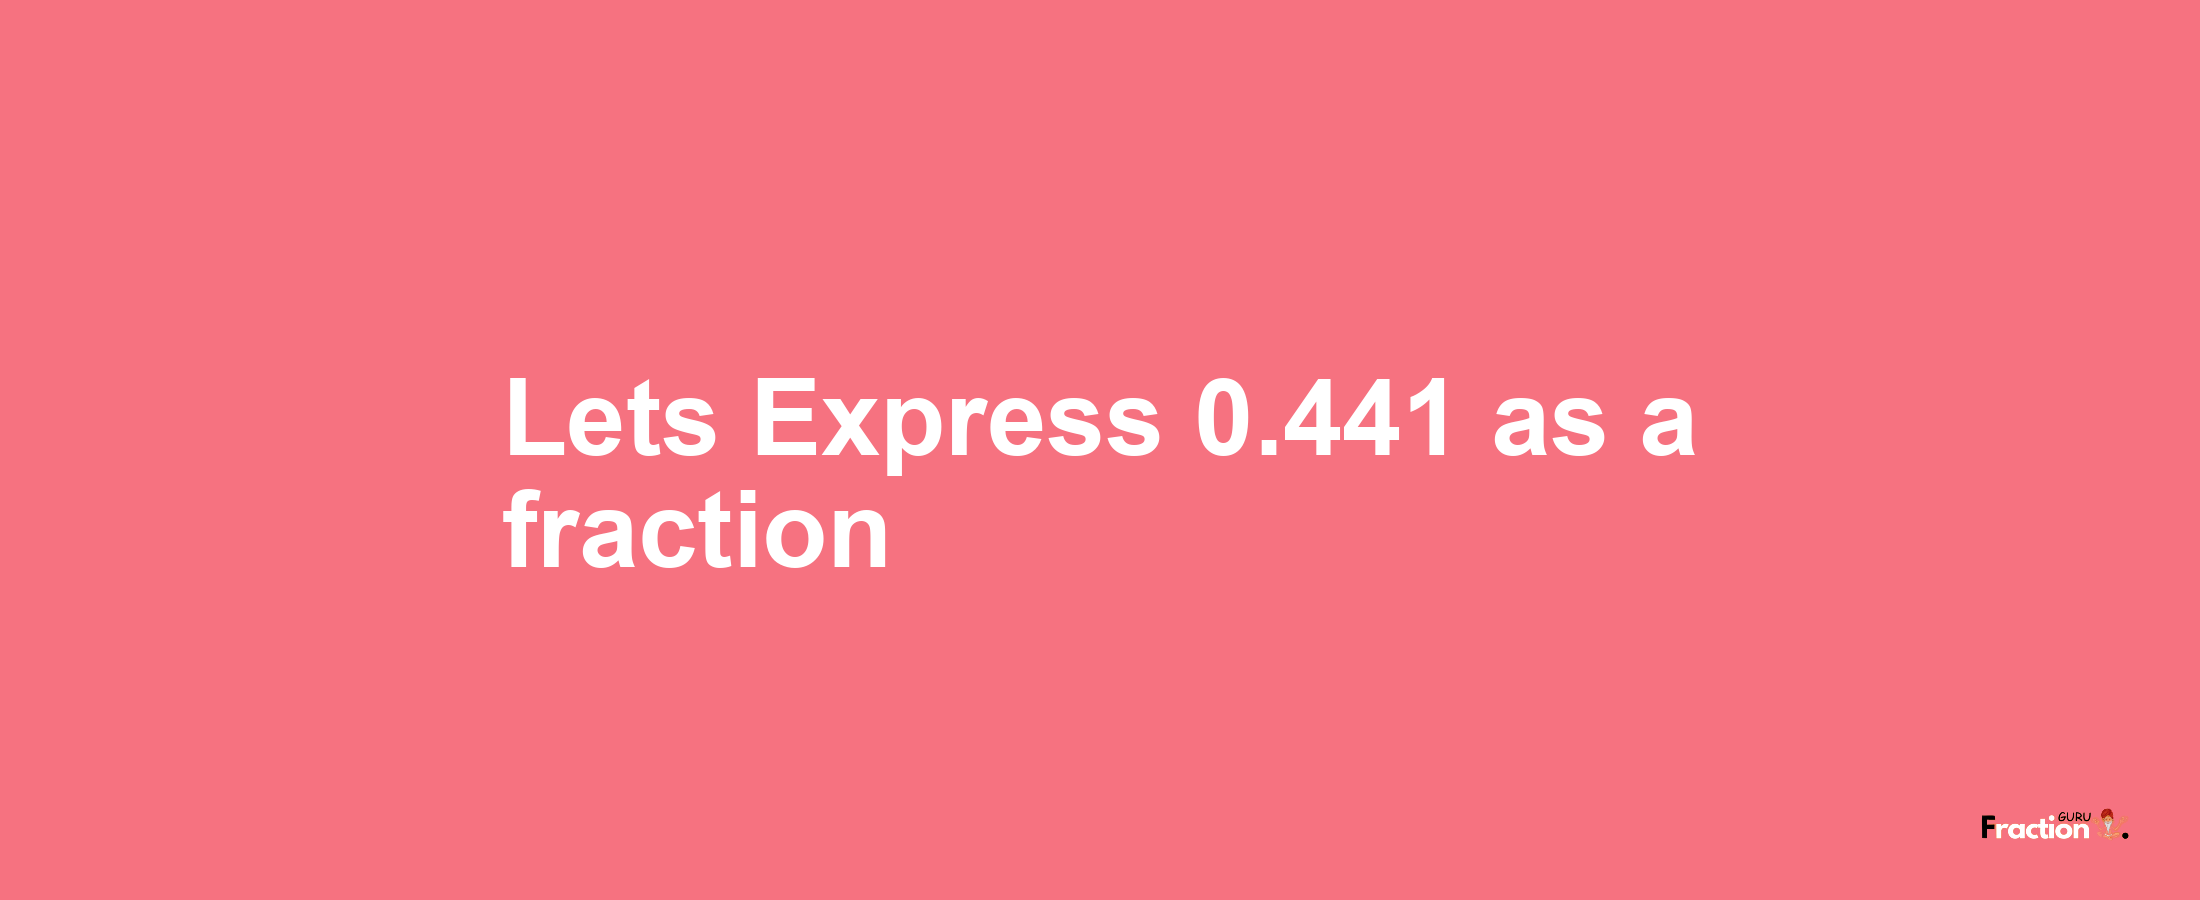 Lets Express 0.441 as afraction